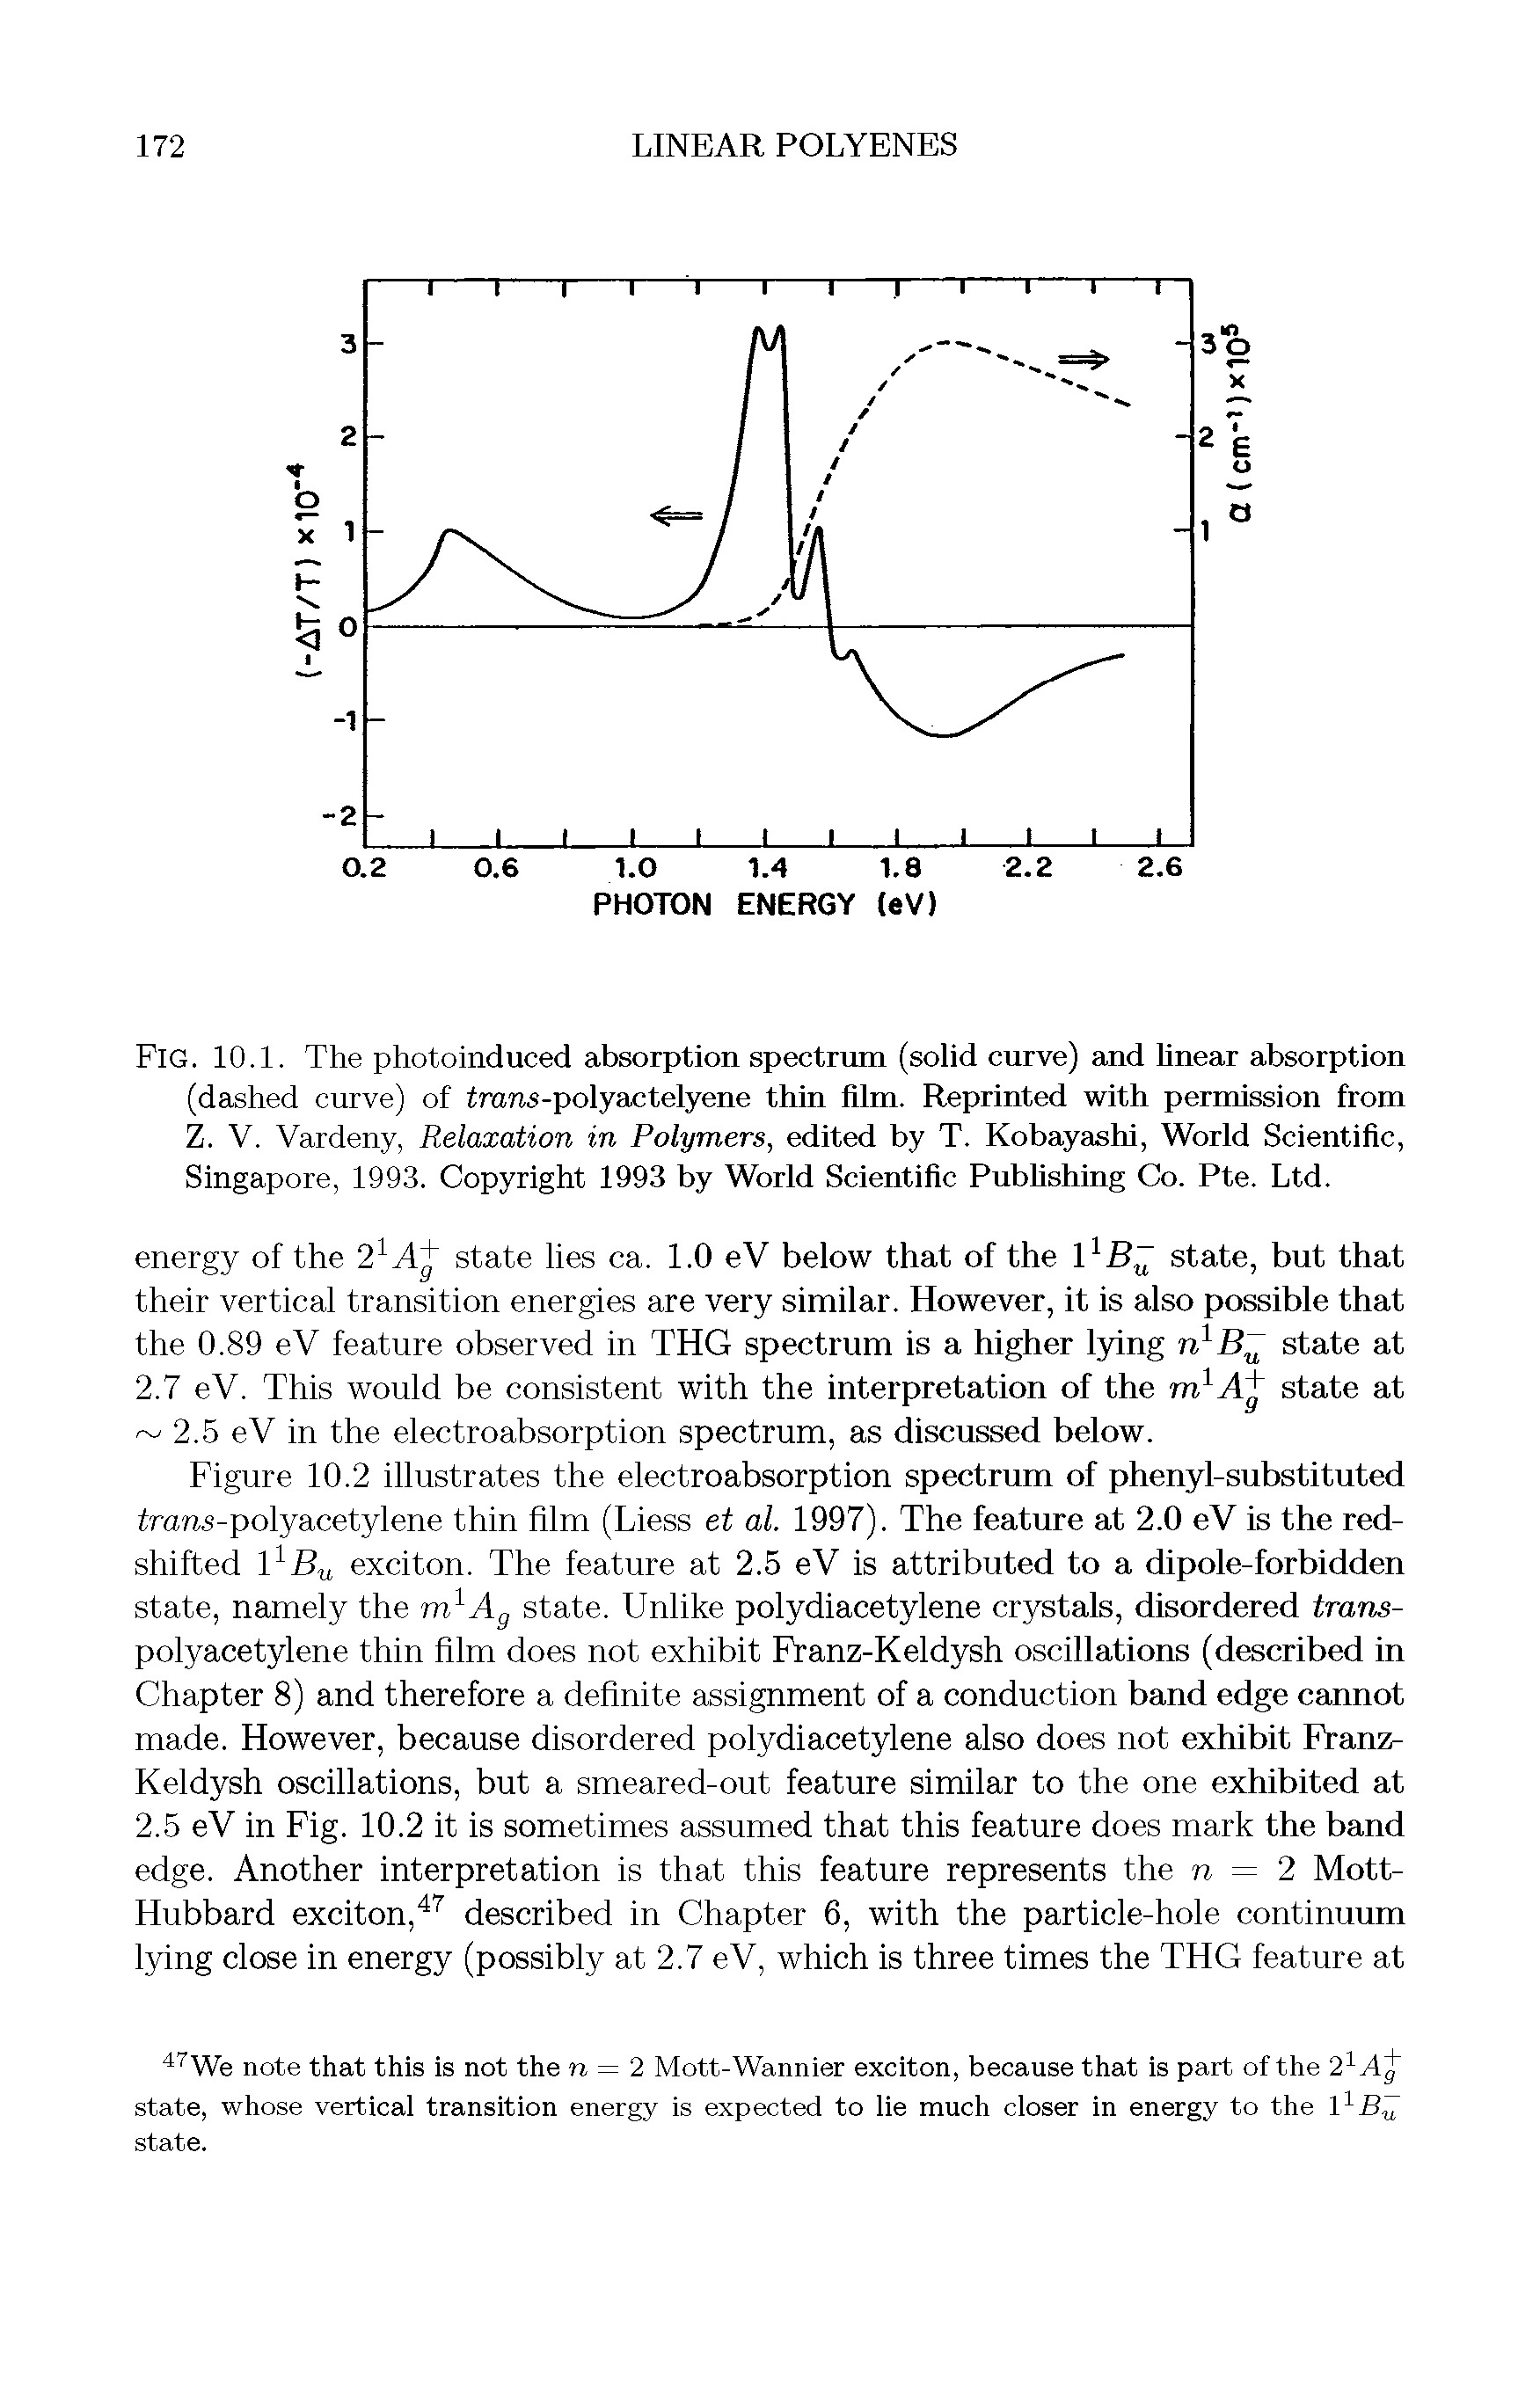 Fig. 10.1. The photoinduced absorption spectrum (solid curve) and linear absorption (dashed curve) of trans-polyactelyene thin film. Reprinted with permission from Z. V. Vardeny, Relaxation in Polymers, edited by T. Kobayashi, World Scientific, Singapore, 1993. Copyright 1993 by World Scientific Publishing Co. Pte. Ltd.